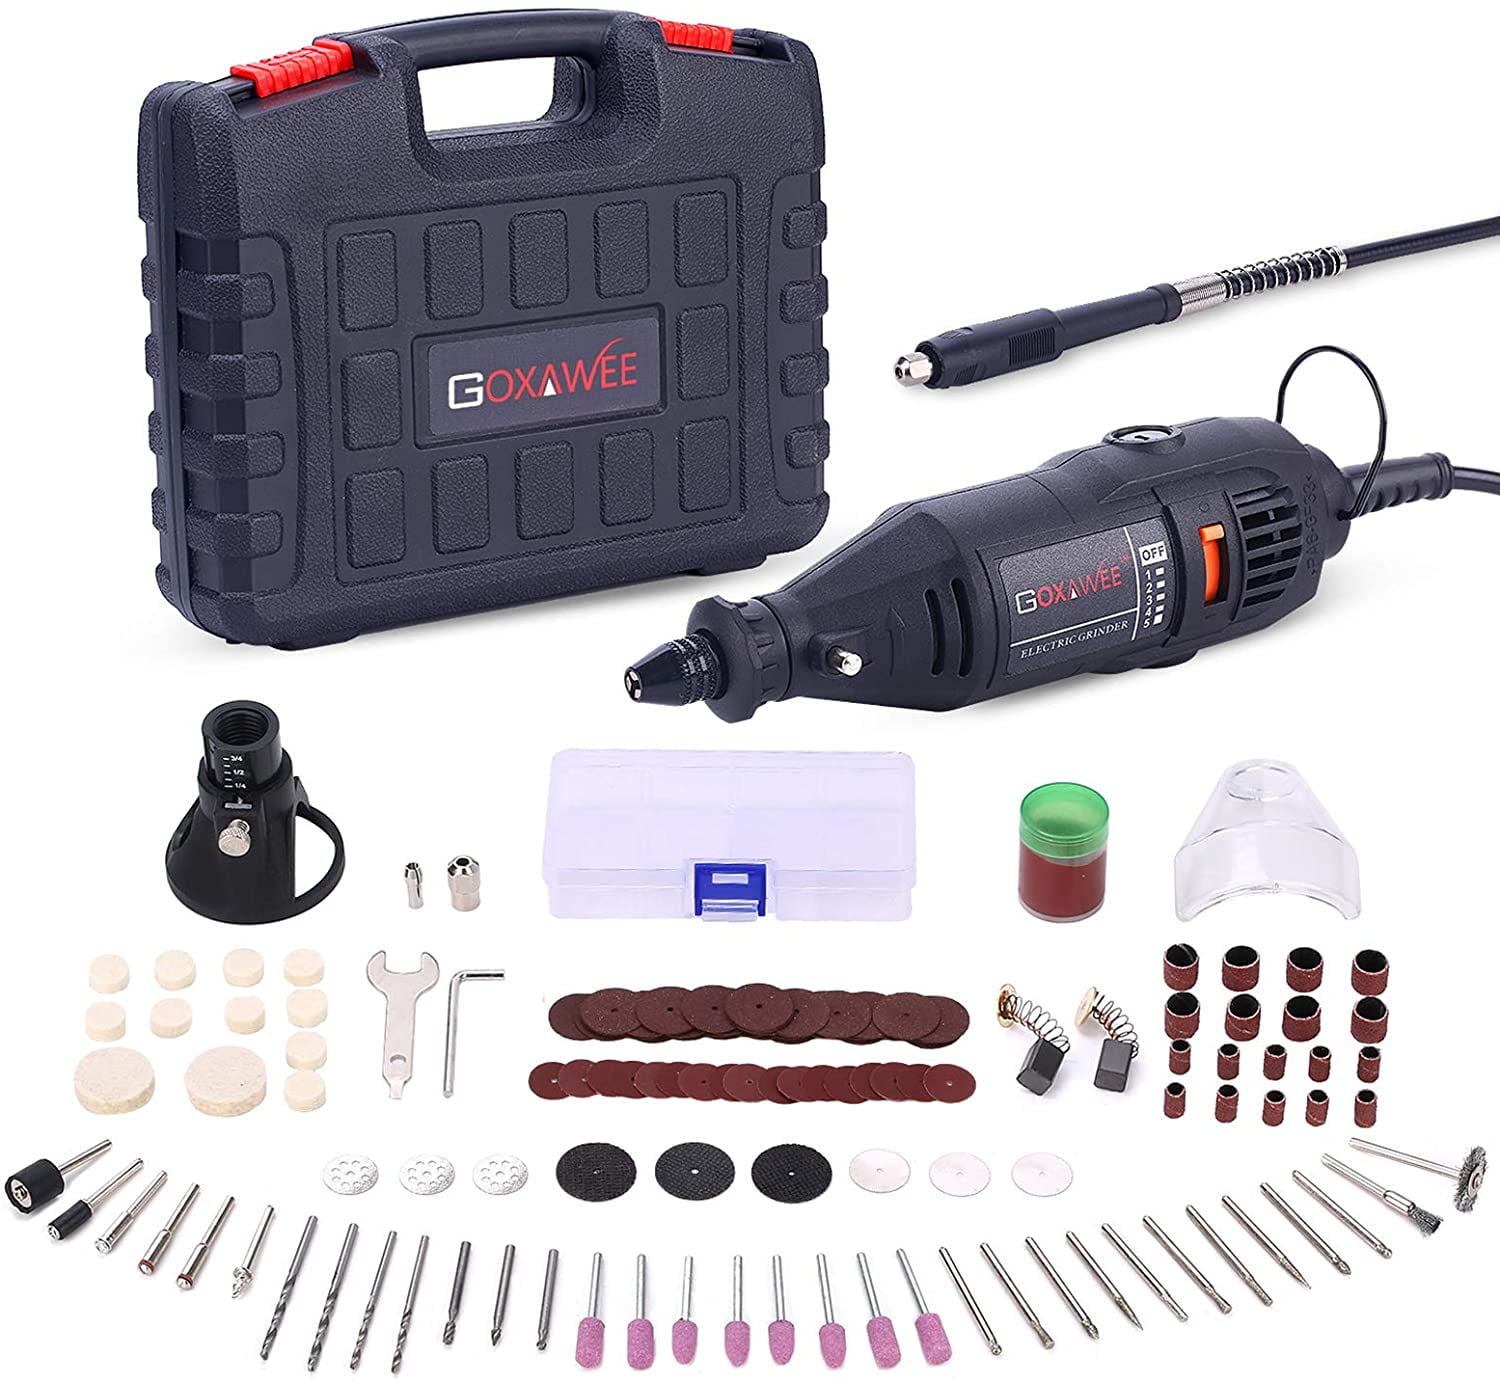 KeShi Rotary Tool - 3.7V Cordless Rotary Tool Accessory Kit, 3 Powerful  Speed Settings, 42 Pieces Swap-able Heads, USB Rechargable Battery for